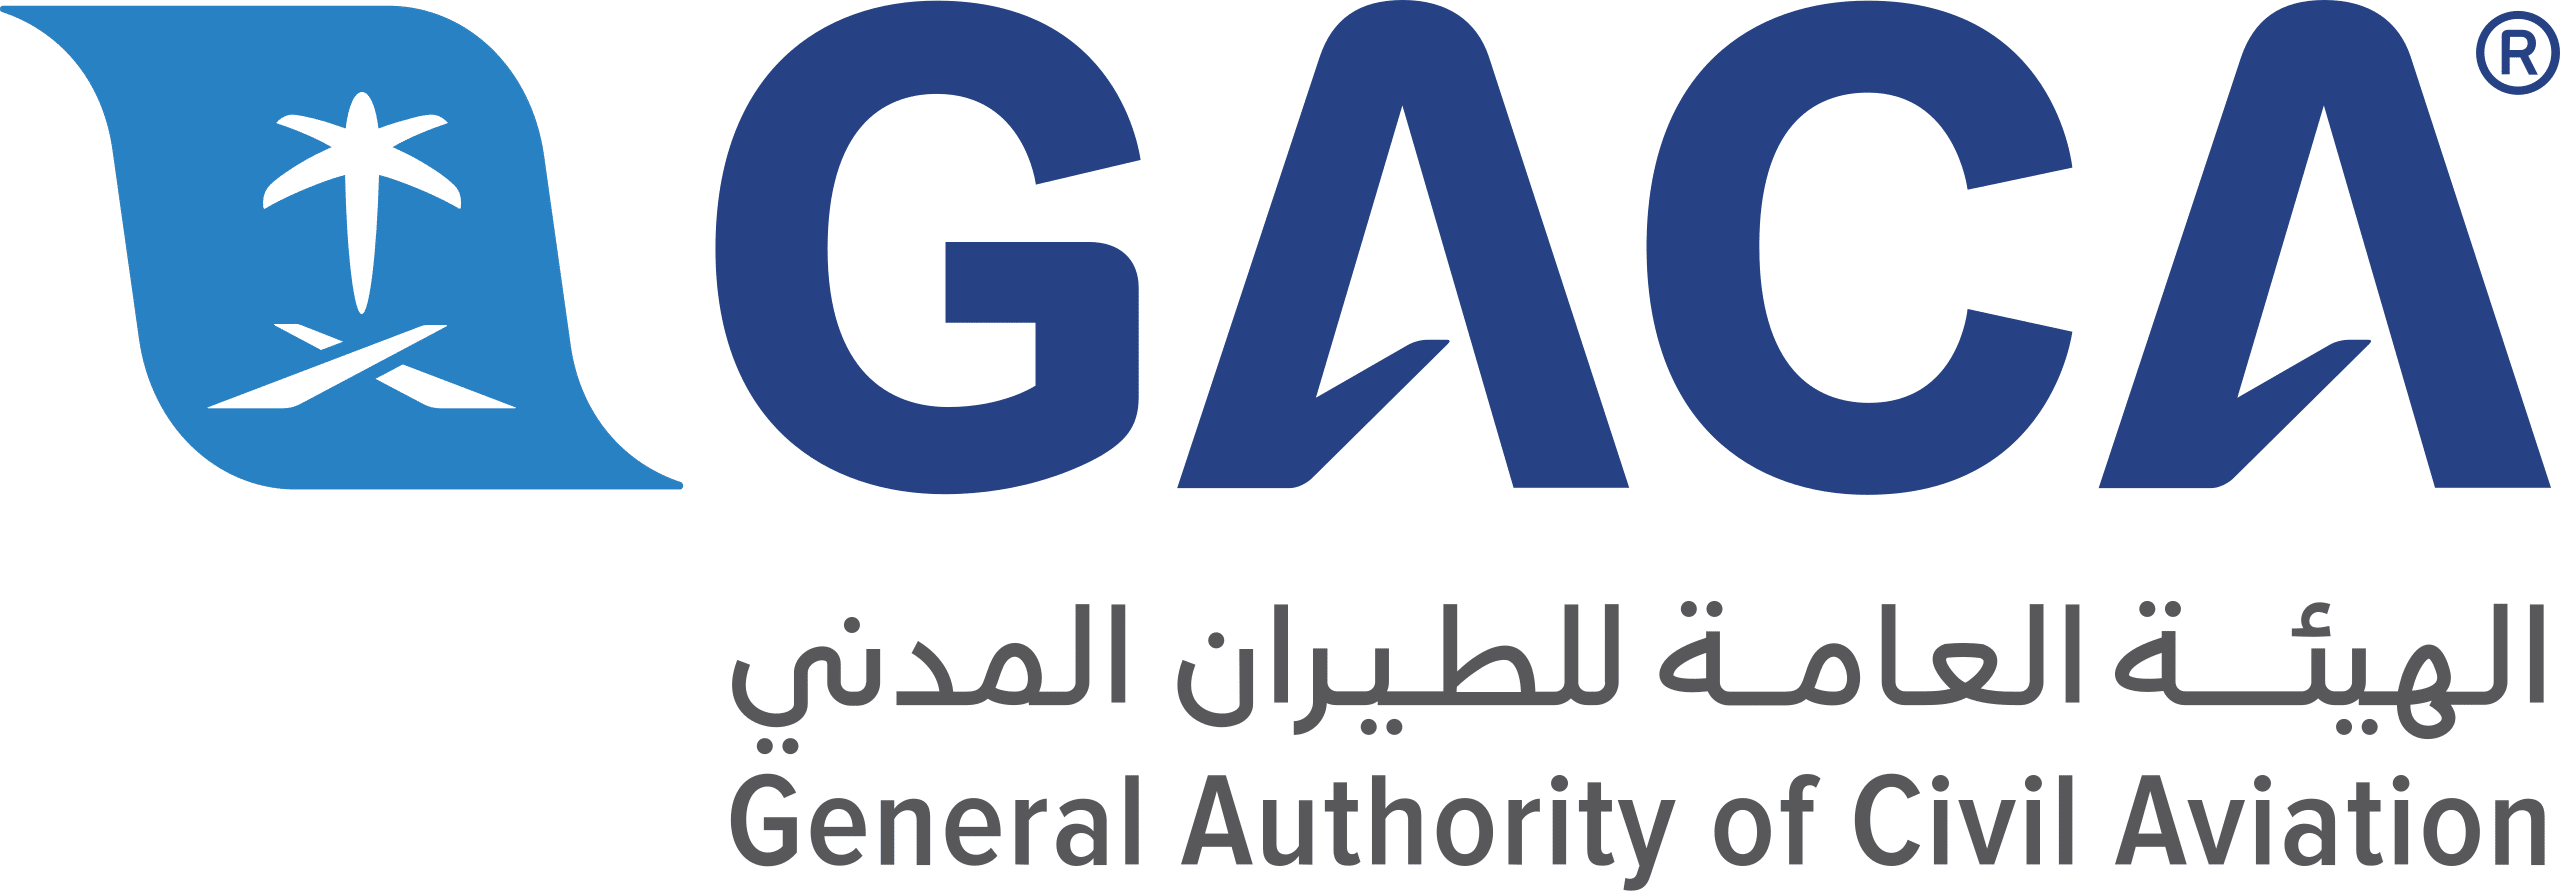 2560px-General_authority_of_civil_aviation_Logo.svg